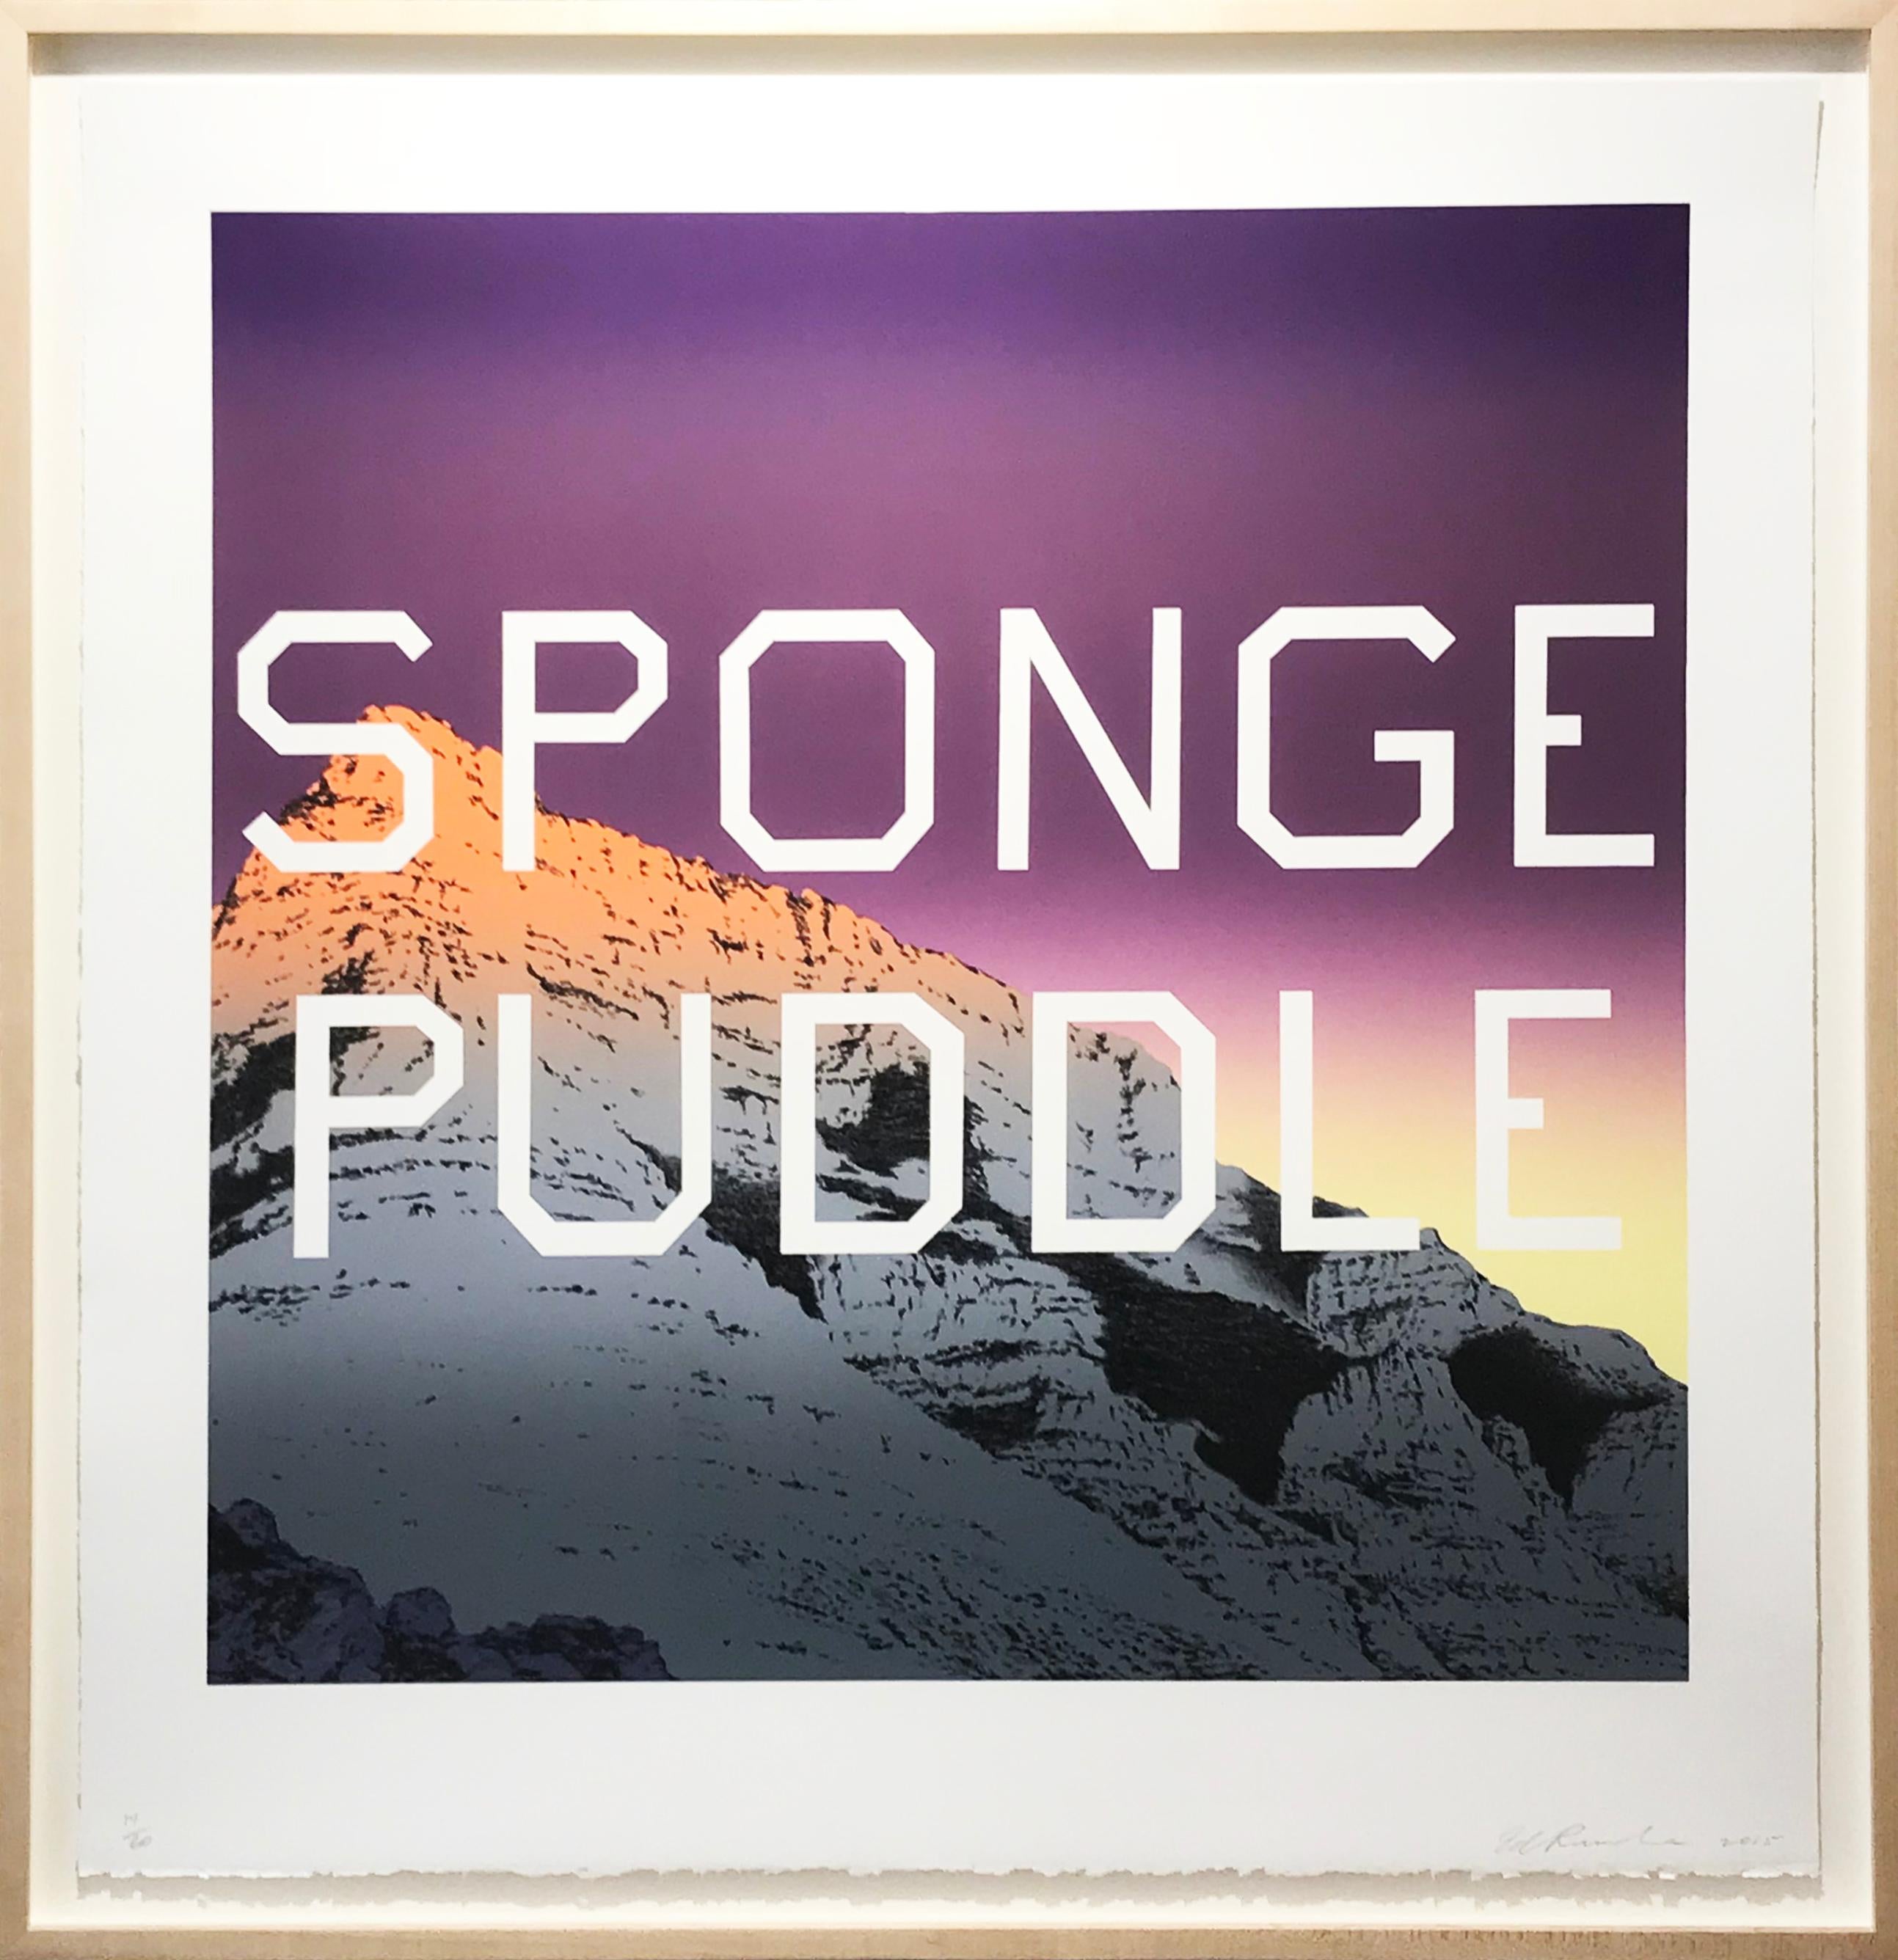 Ed Ruscha, Sponge Puddle, Lithograph, 2015, signed, dated and numbered.  1